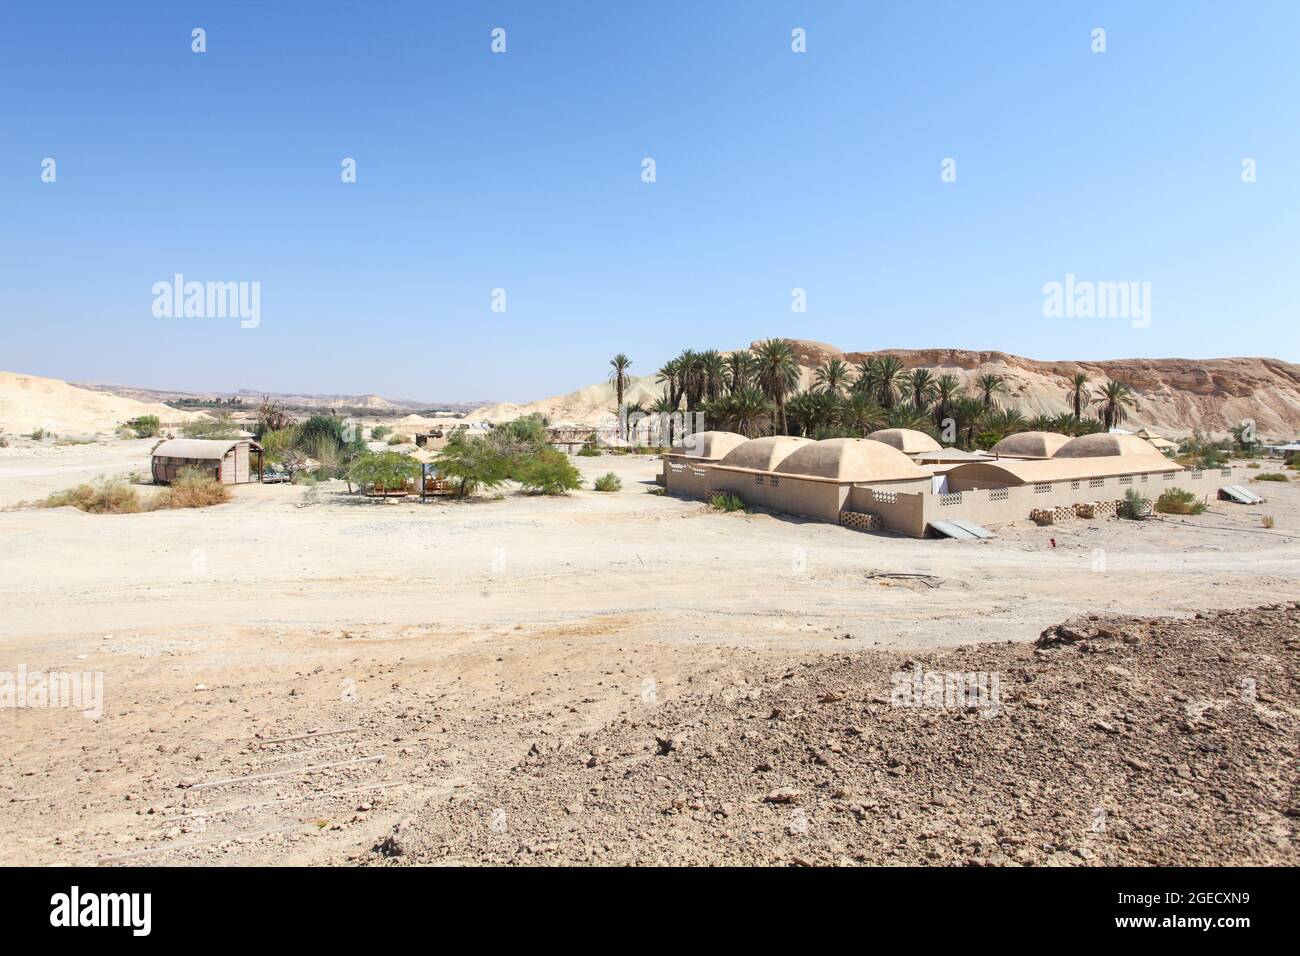 Desert landscape mud buildings around an oasis. Photographed in the Middle East Stock Photo